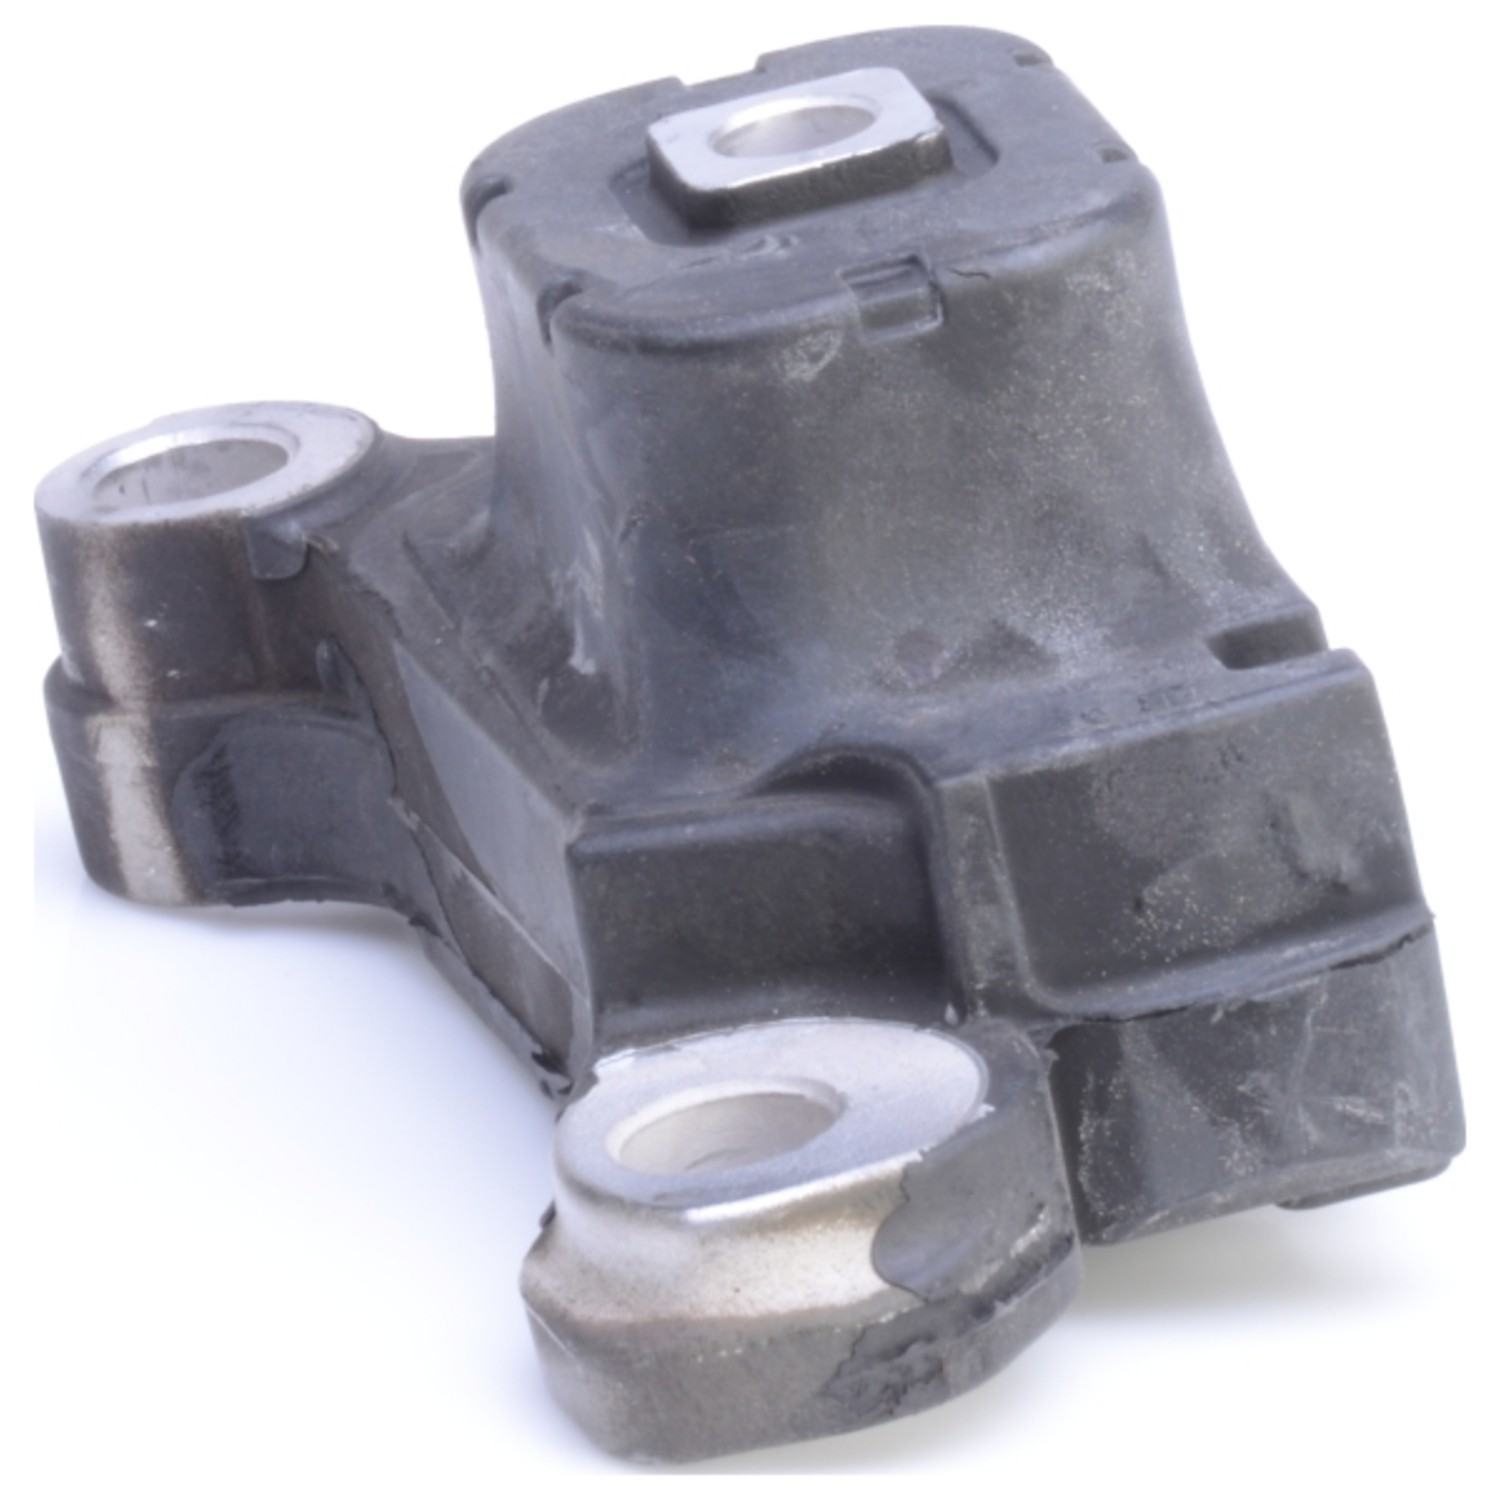 Left View of Left Automatic Transmission Mount ANCHOR 9860